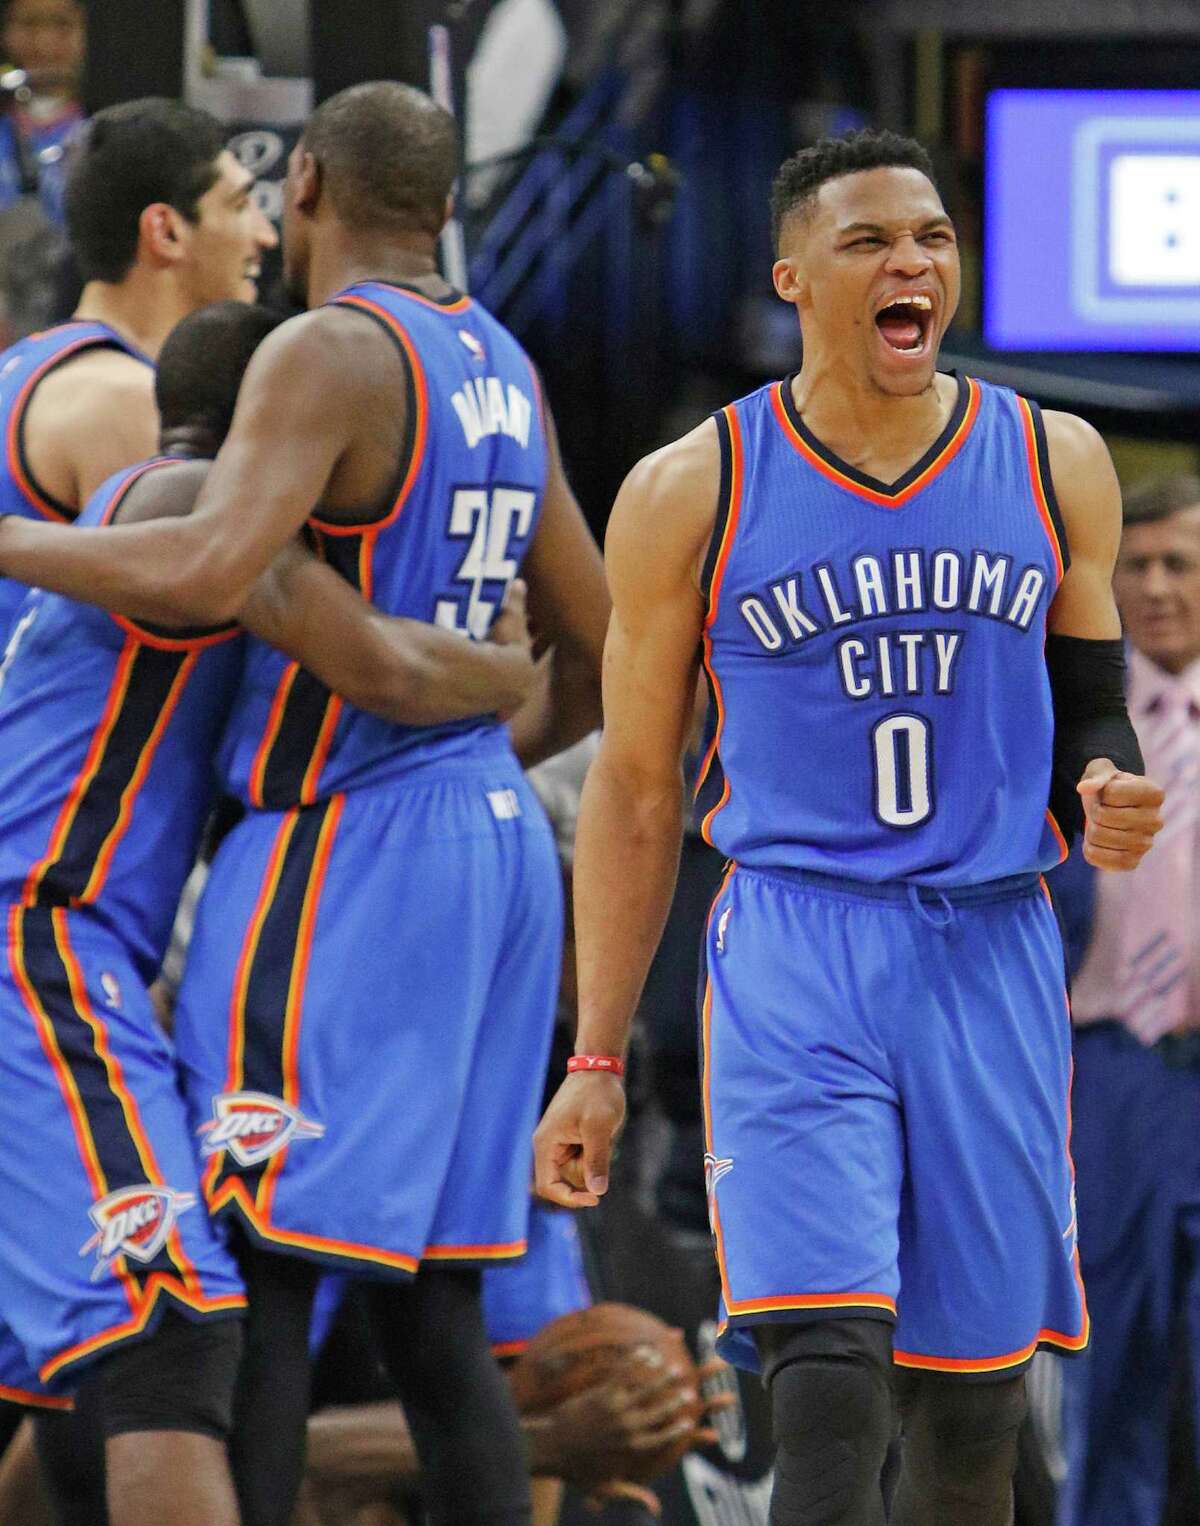 Call it a Thunderclap. Russell Westbrook, right, leads the celebration after Oklahoma City beat the Spurs at the AT&T Center in San Antonio on Monday.﻿